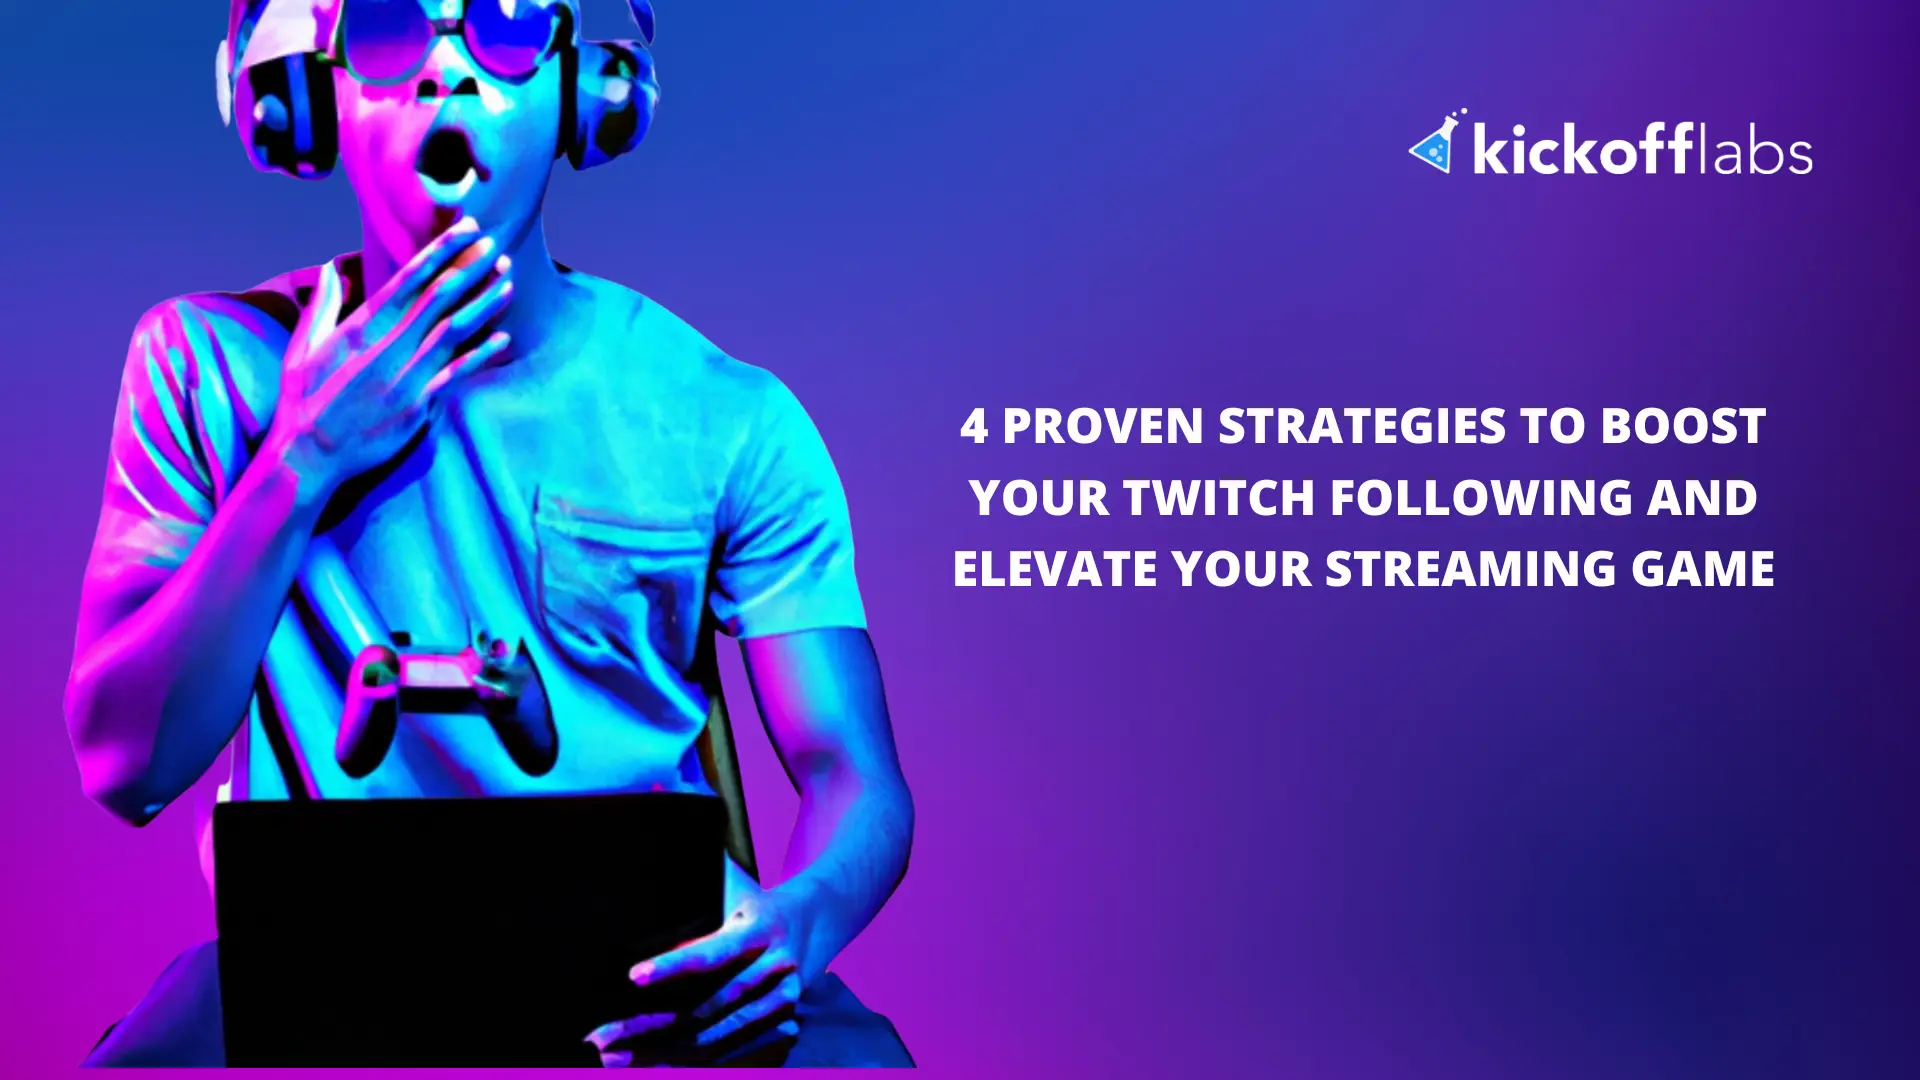 How To Get More Twitch Followers: 10 Proven Tips